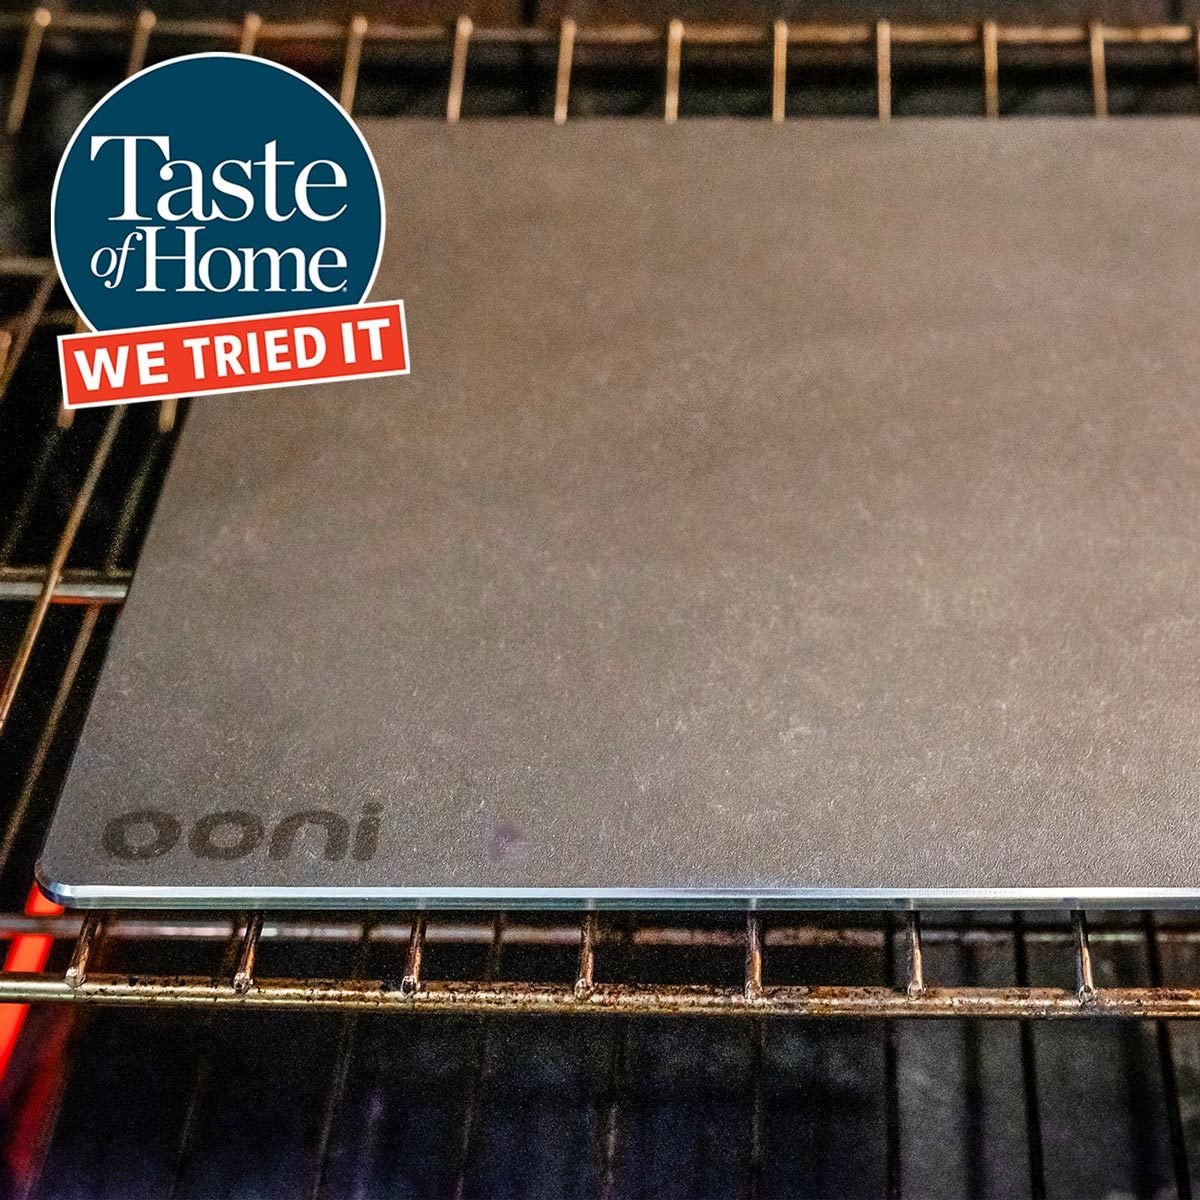 Baking Steel Griddle Review